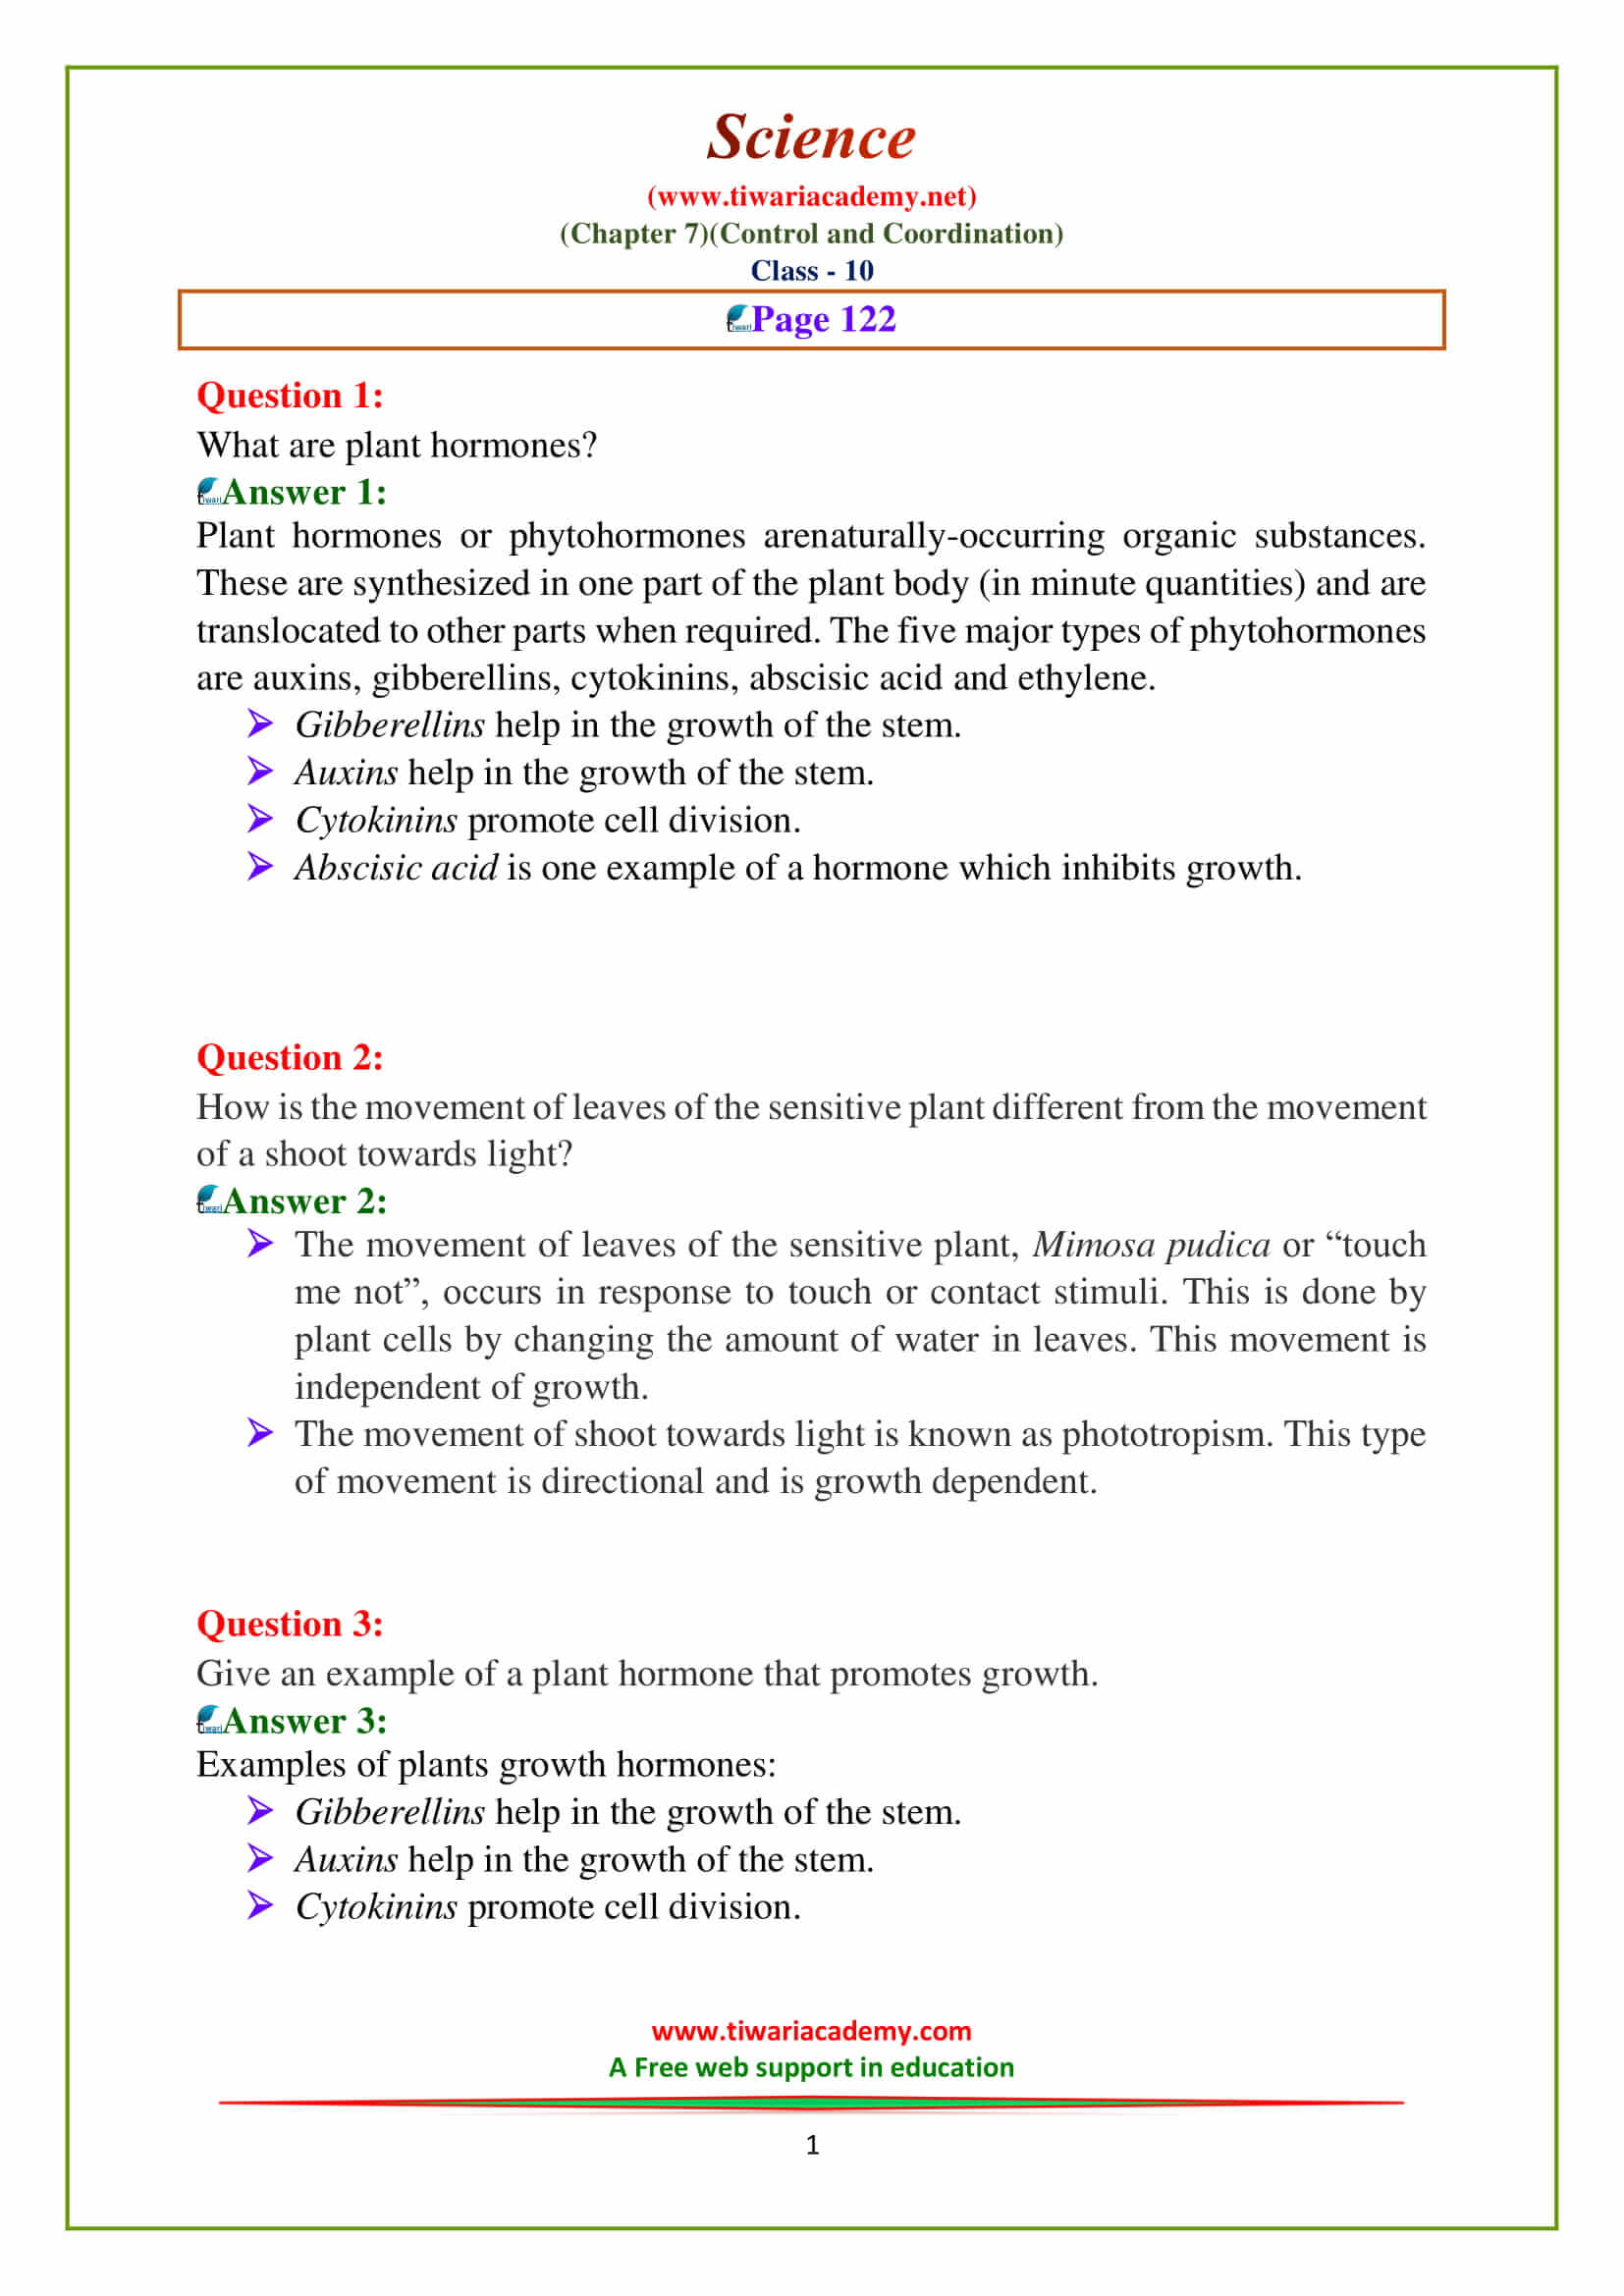 10 Science Chapter 7 Intext questions on page 122